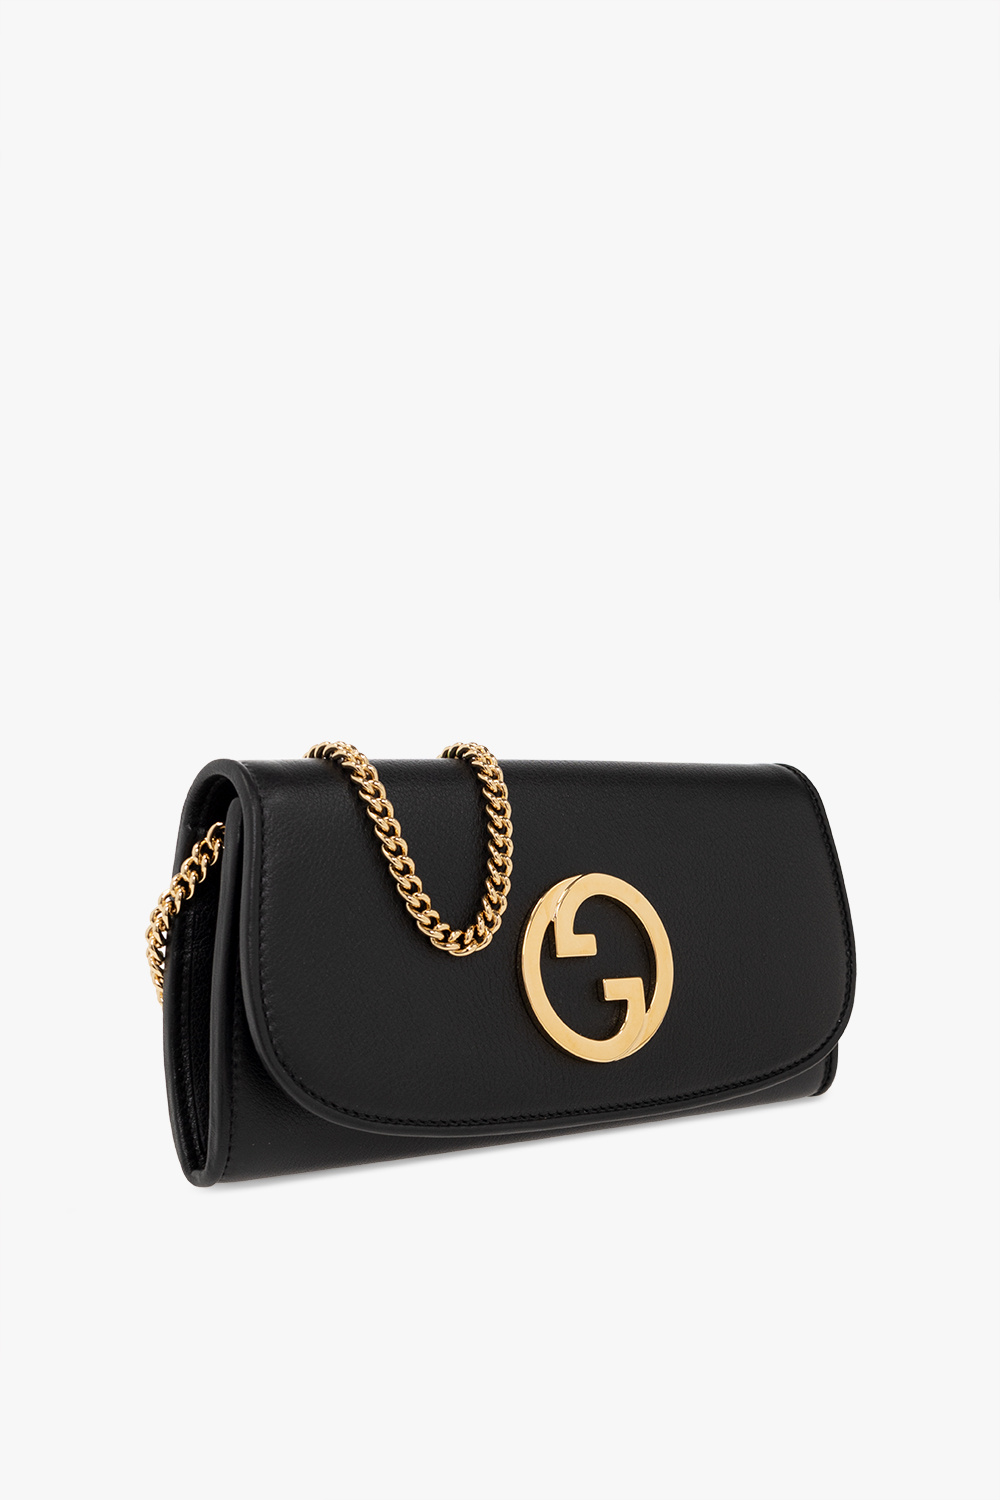 gucci LOGO ‘Blondie’ leather wallet on chain